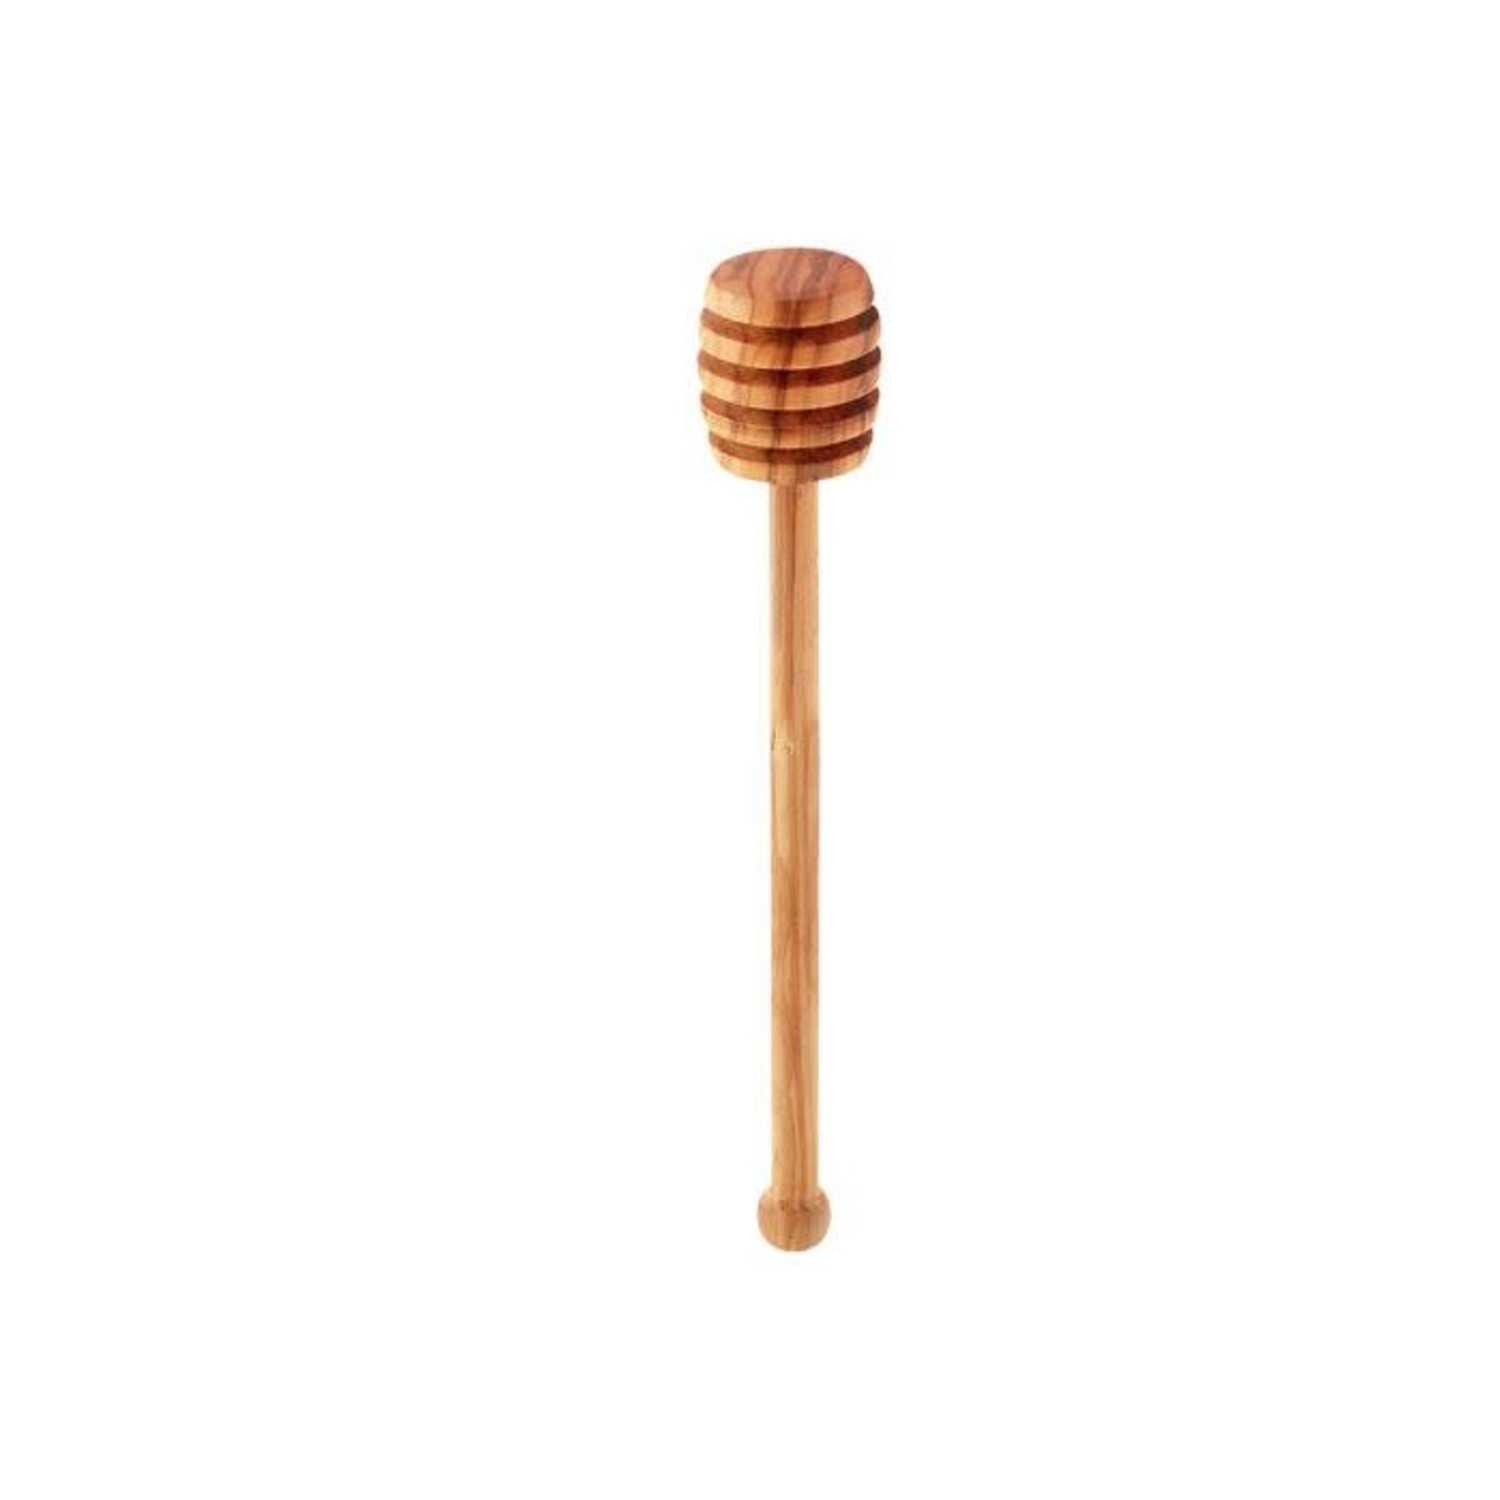 • KEDI Honey Dipper Honeycomb Sticks for Drizzling Honey Handcrafted Olive Wooden 7.48 Inches Olive Wood Honey Spoons/Stick Honey Dipper Stick 